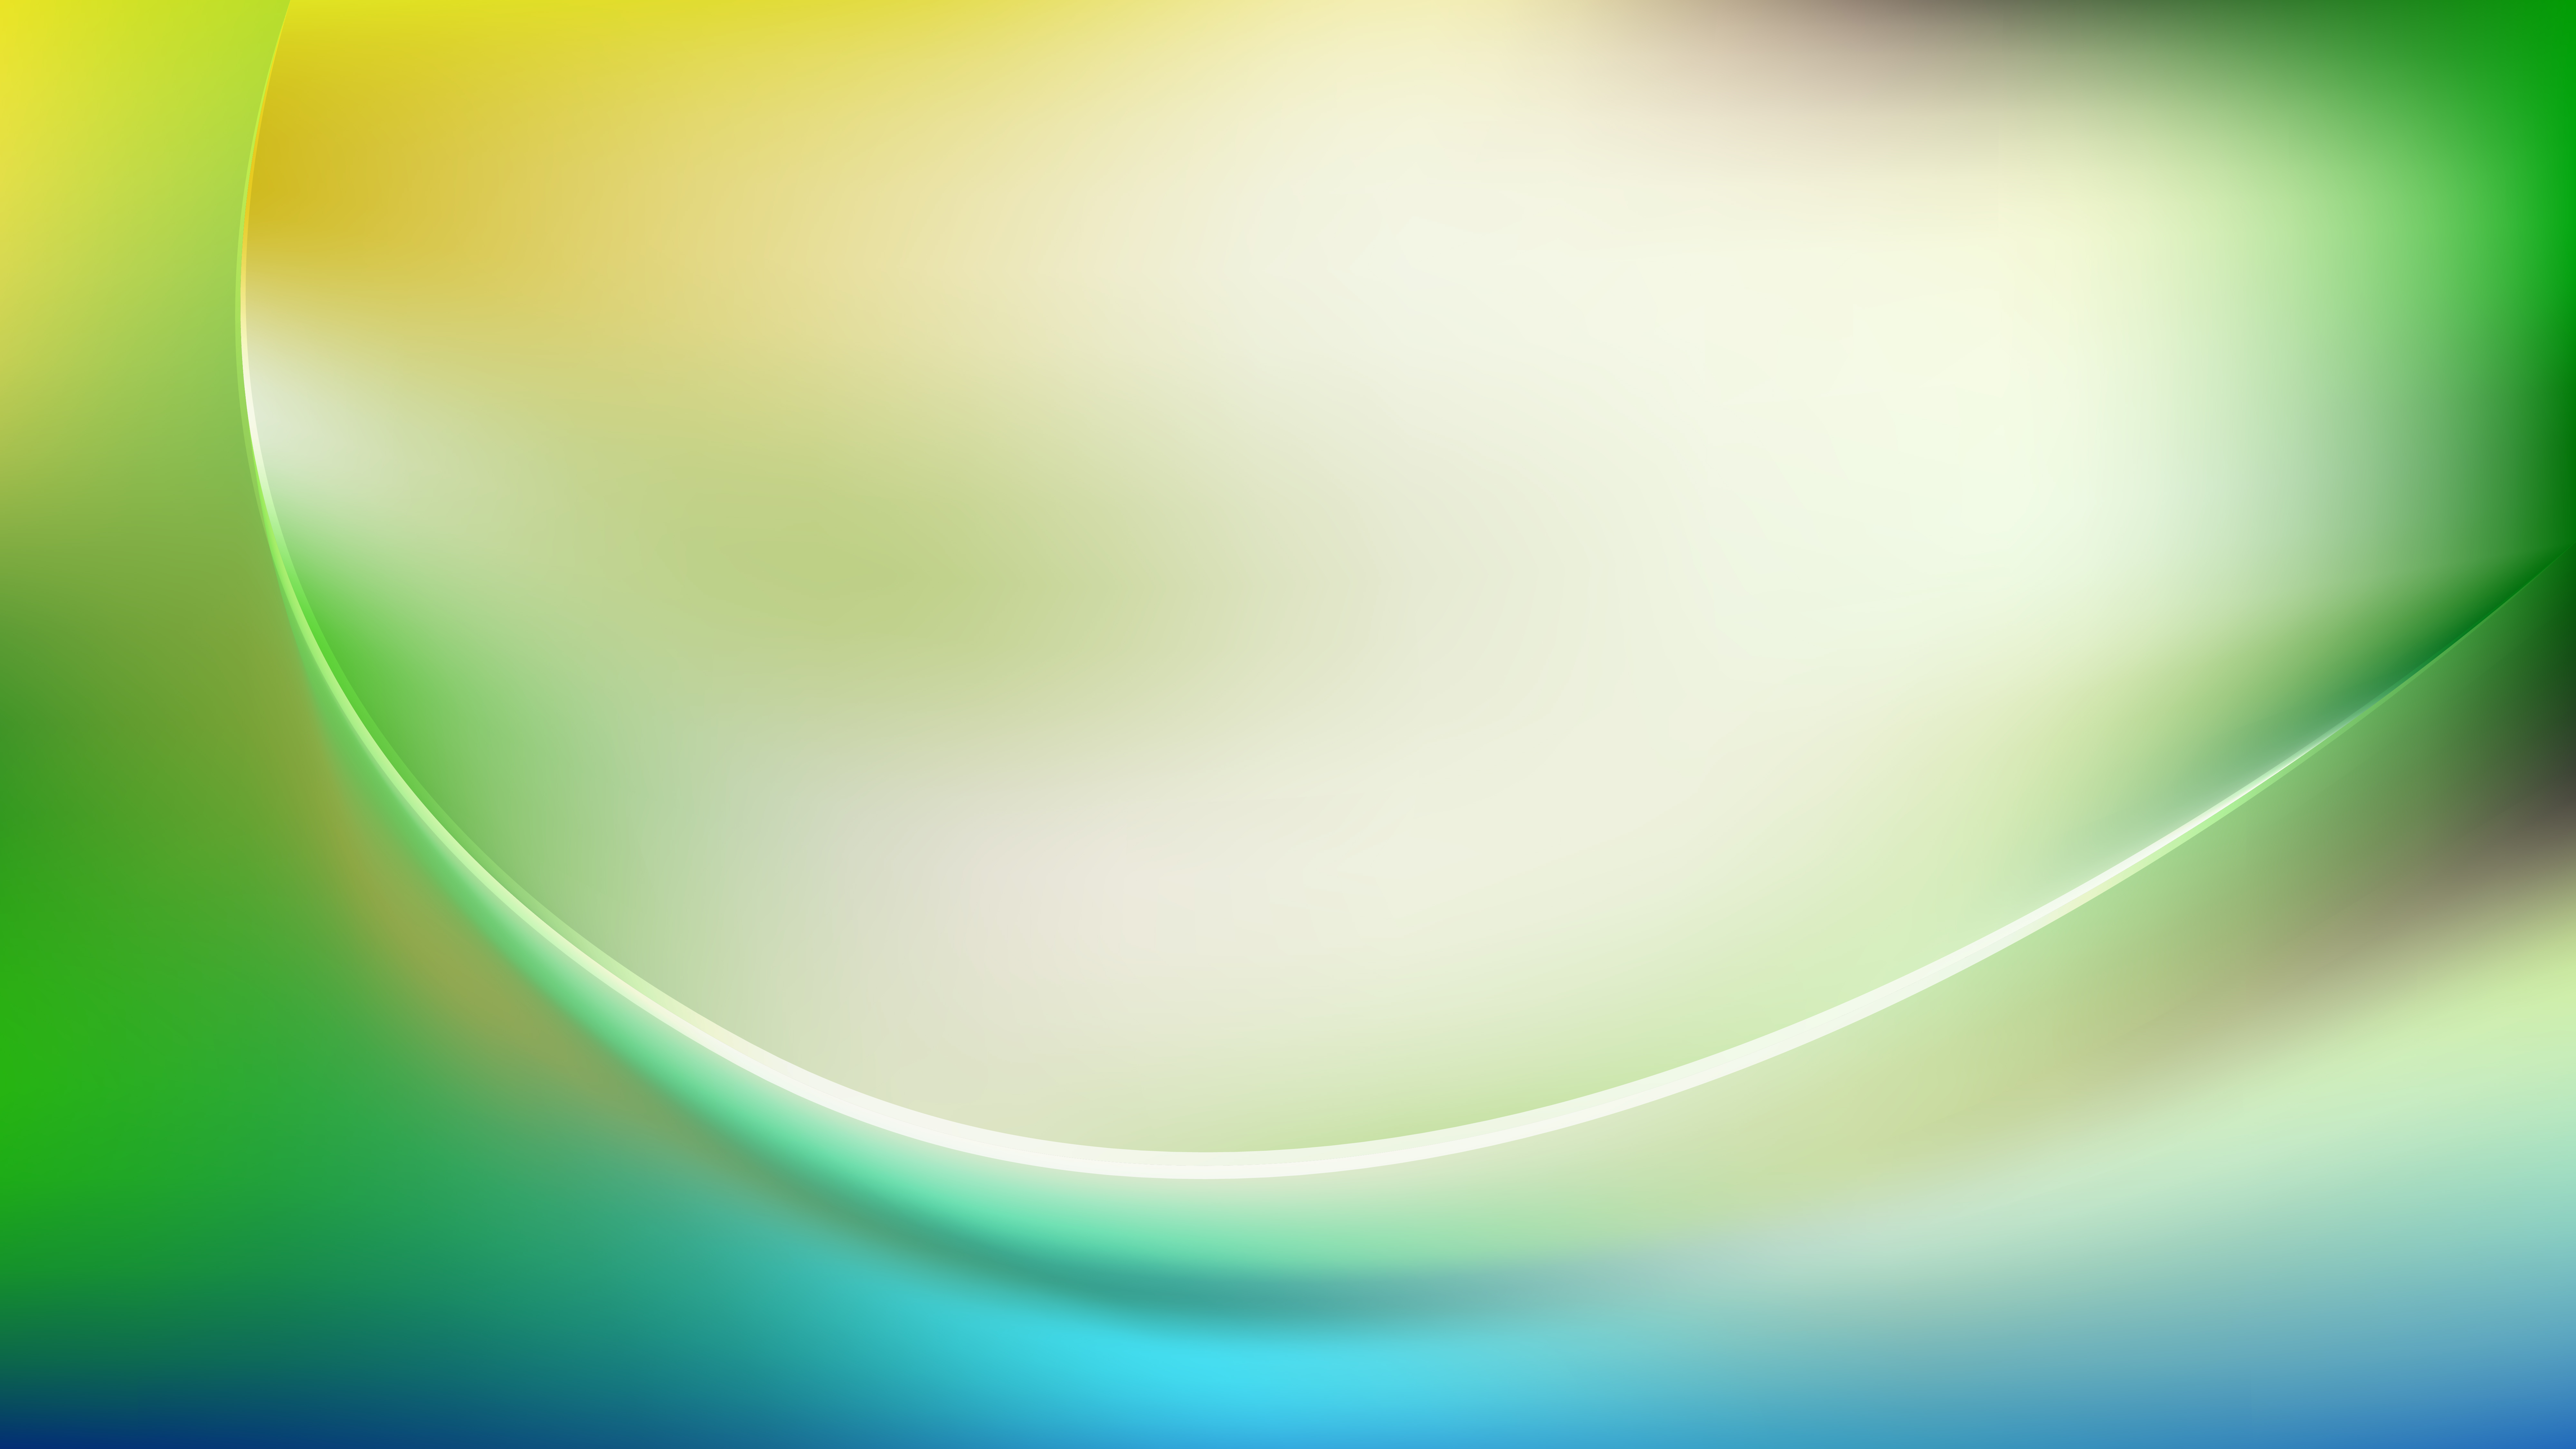 Free Abstract Blue Green And White Shiny Wave Background